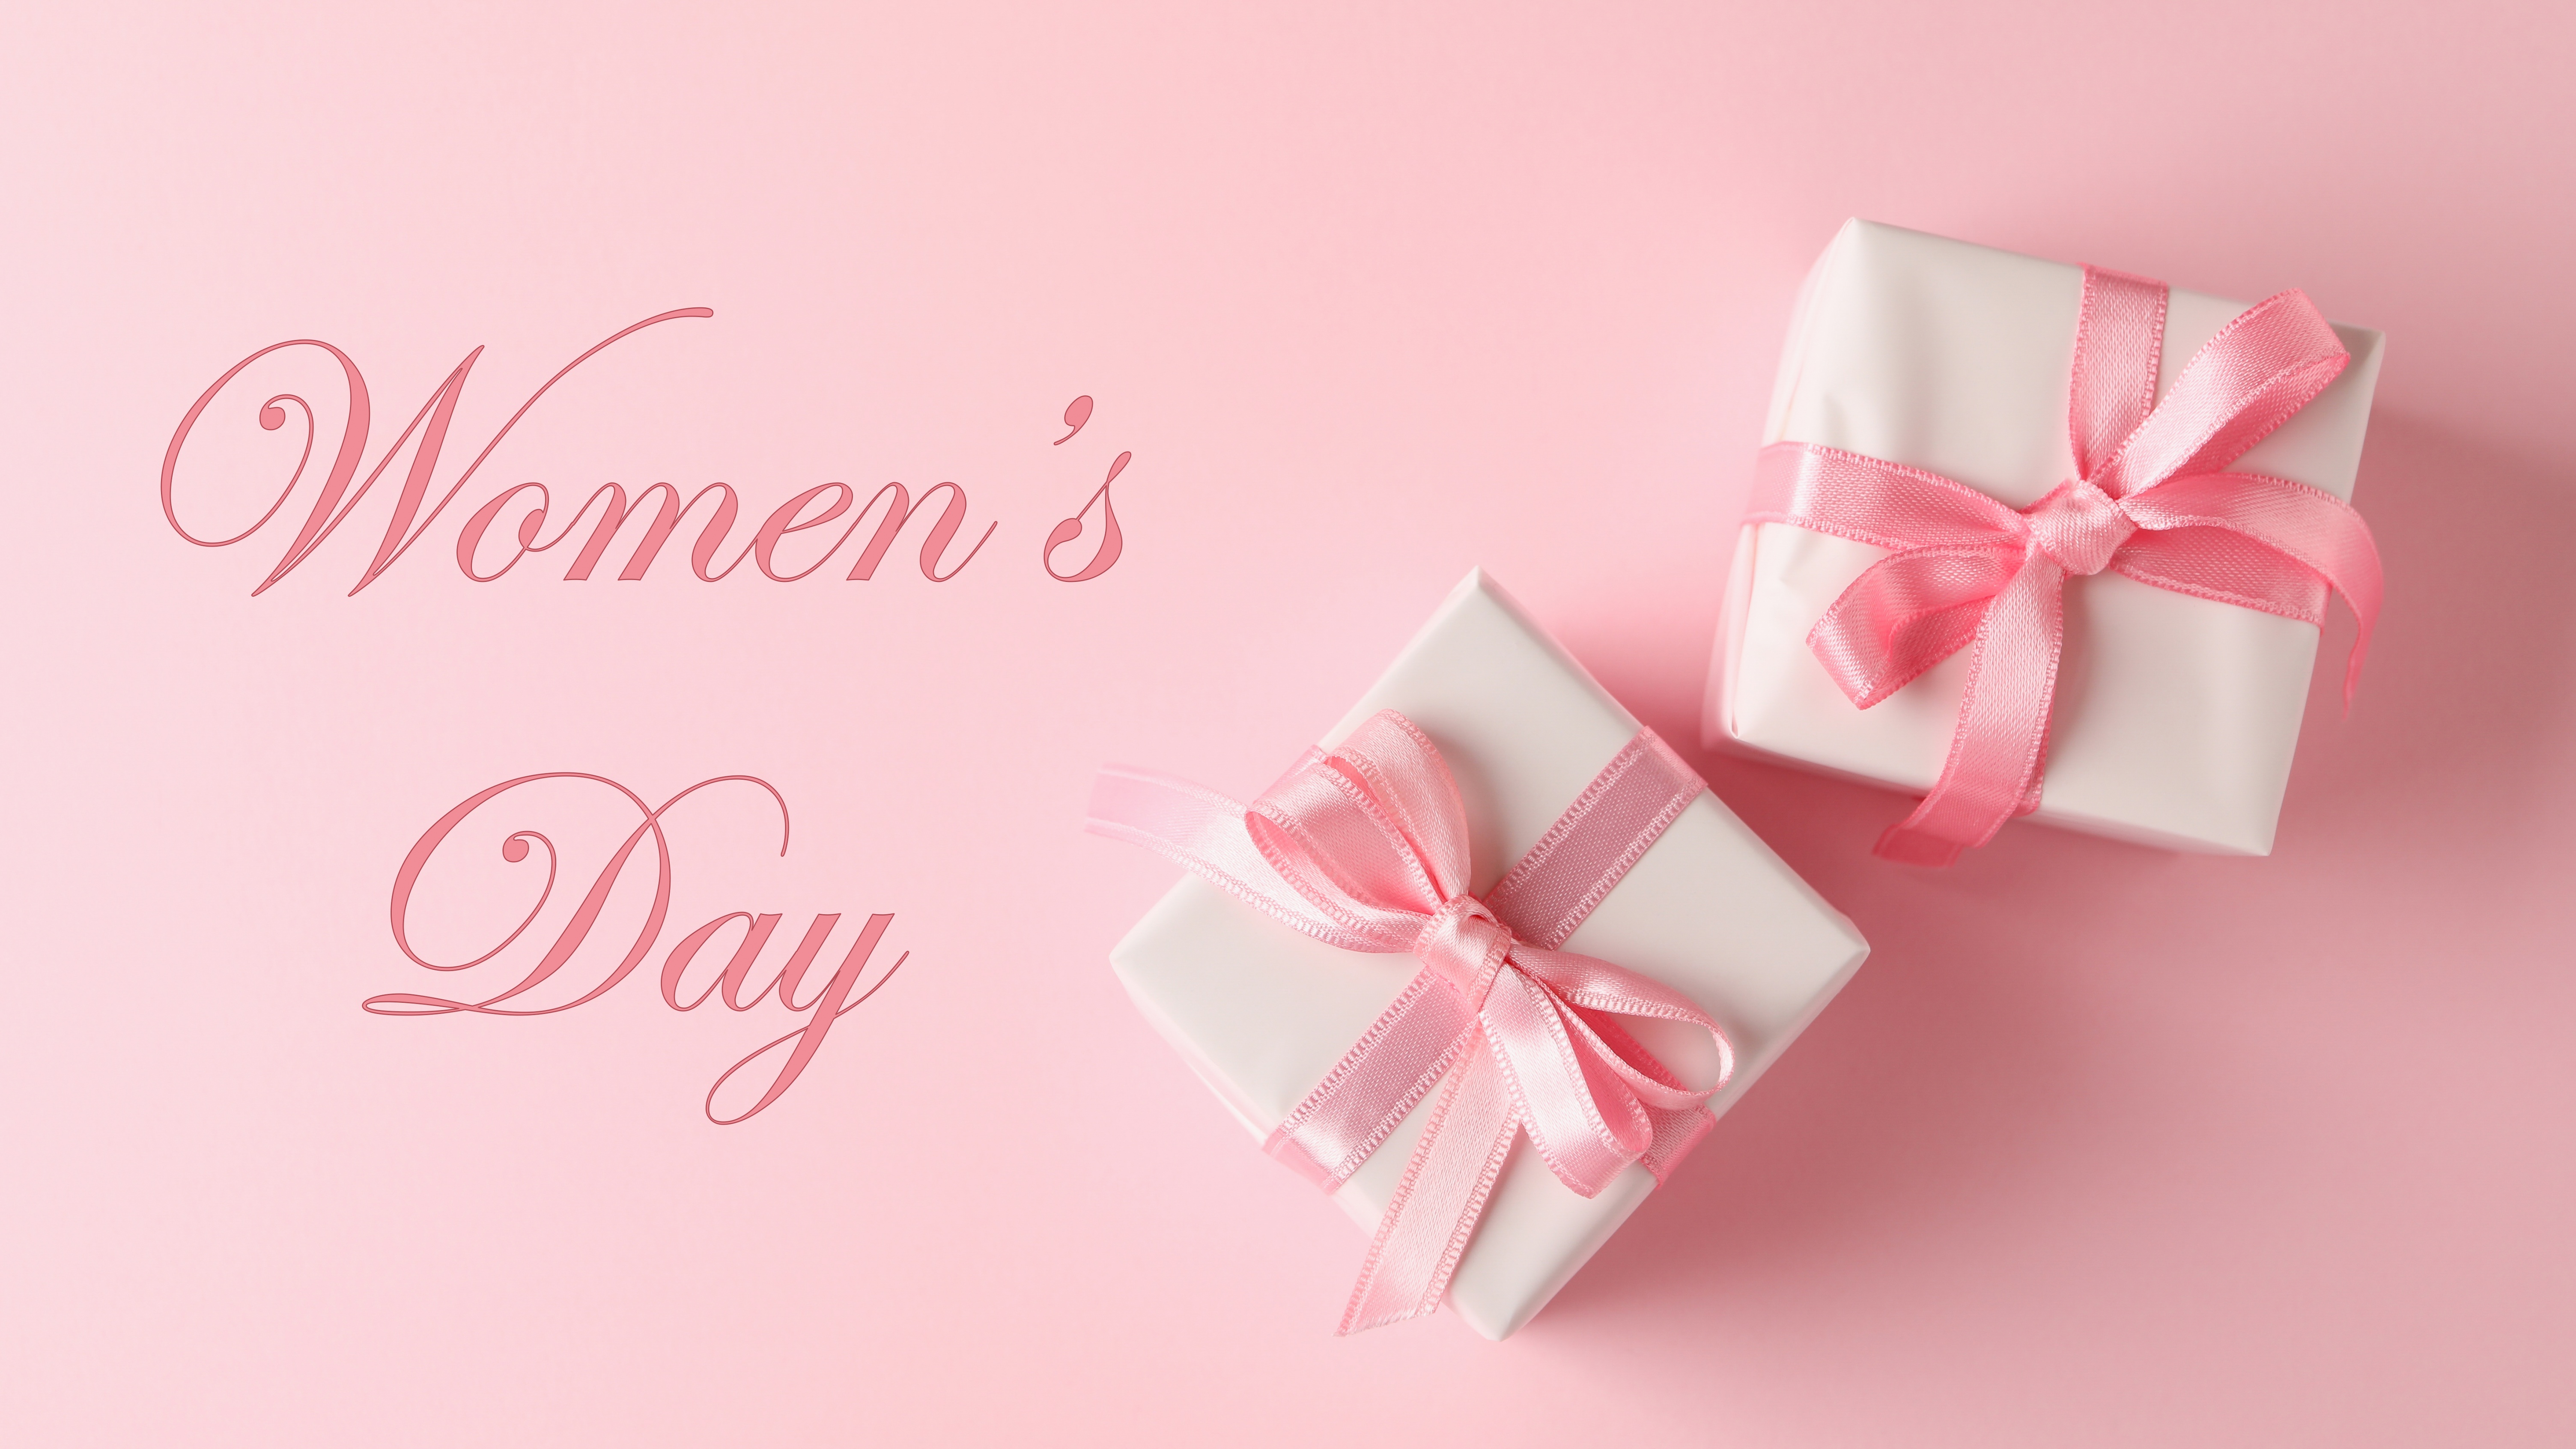 Women's Day Wallpaper 4K, March 8th, Gifts, Celebrations, #7589